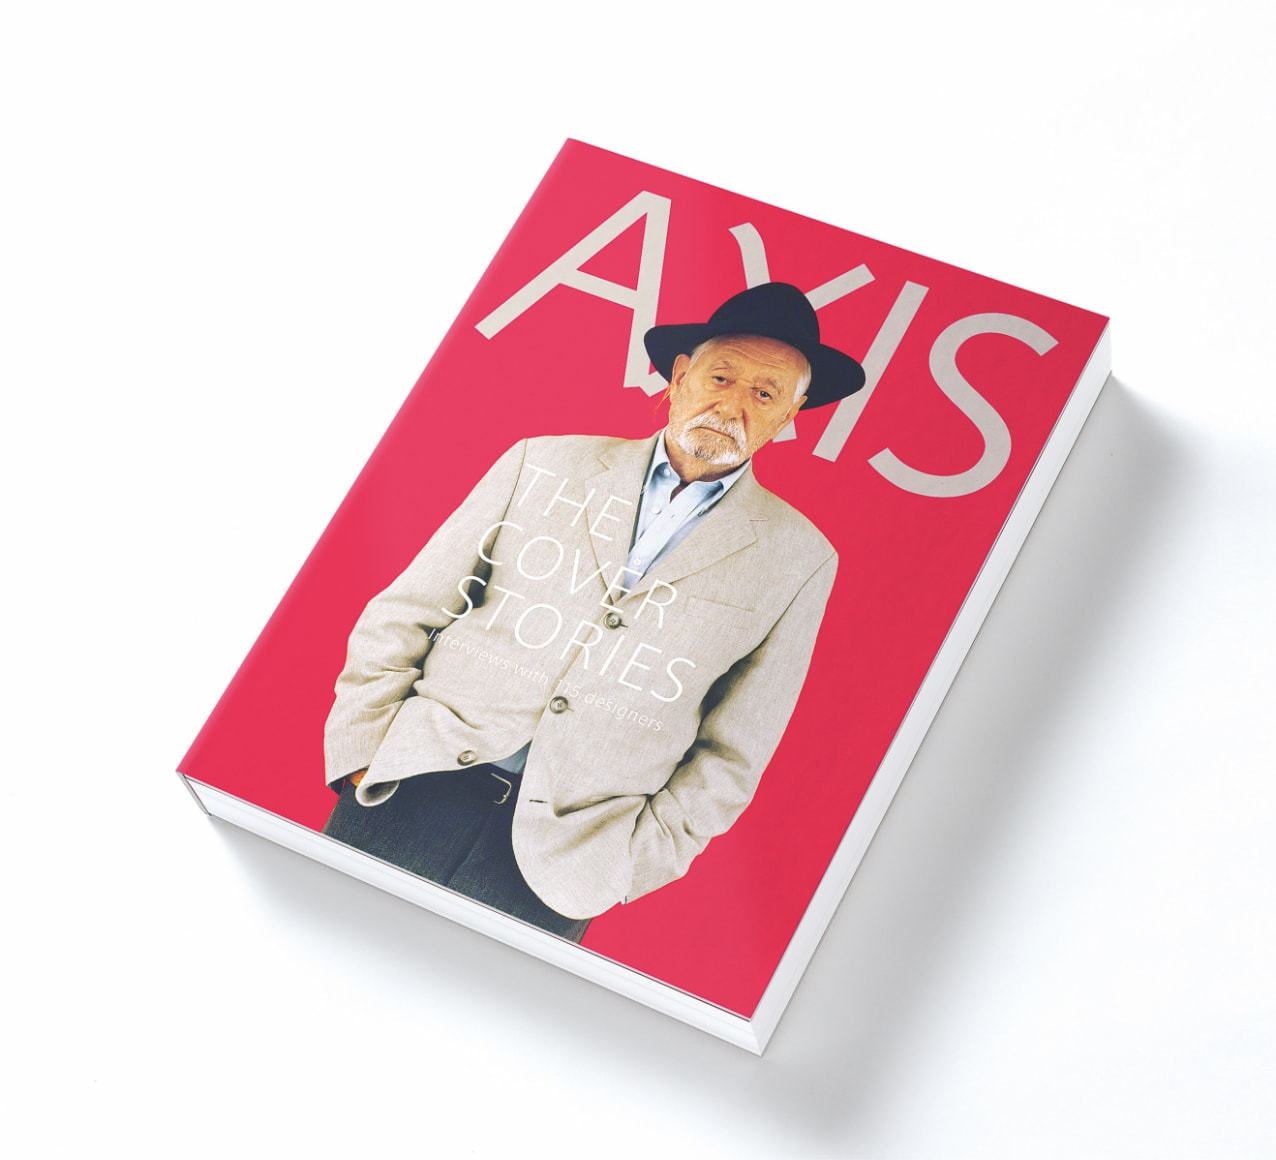 「AXIS THE COVER STORIES —Interviews with 115 designers」出版